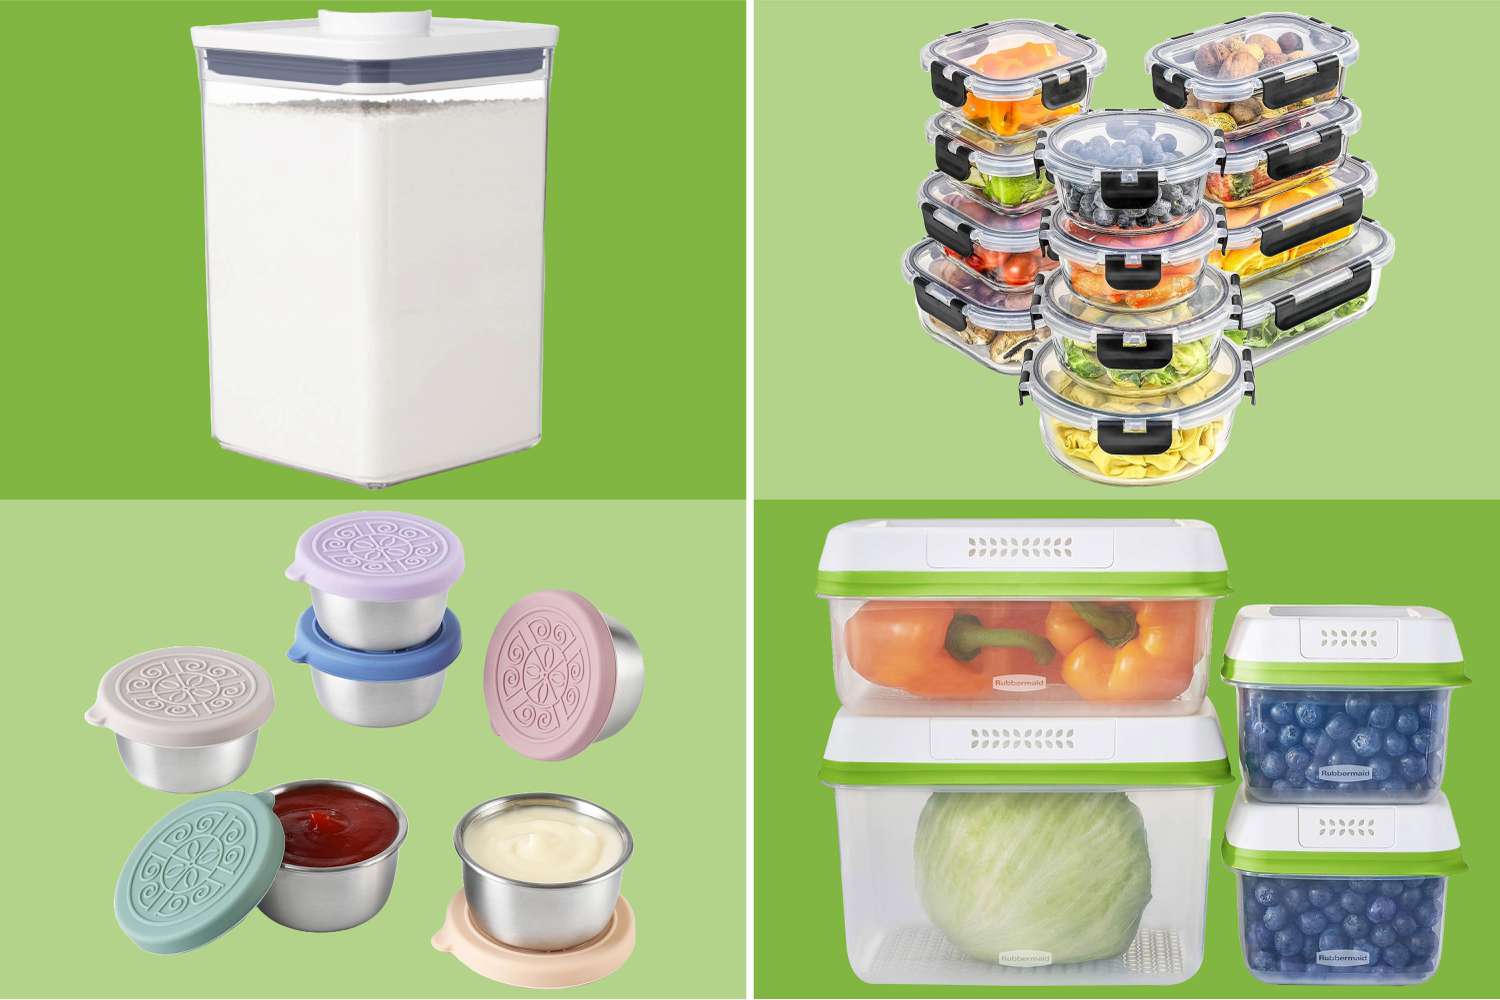 Food Storage Containers from Pyrex, Oxo, and More Are on Sale at Amazon [Video]